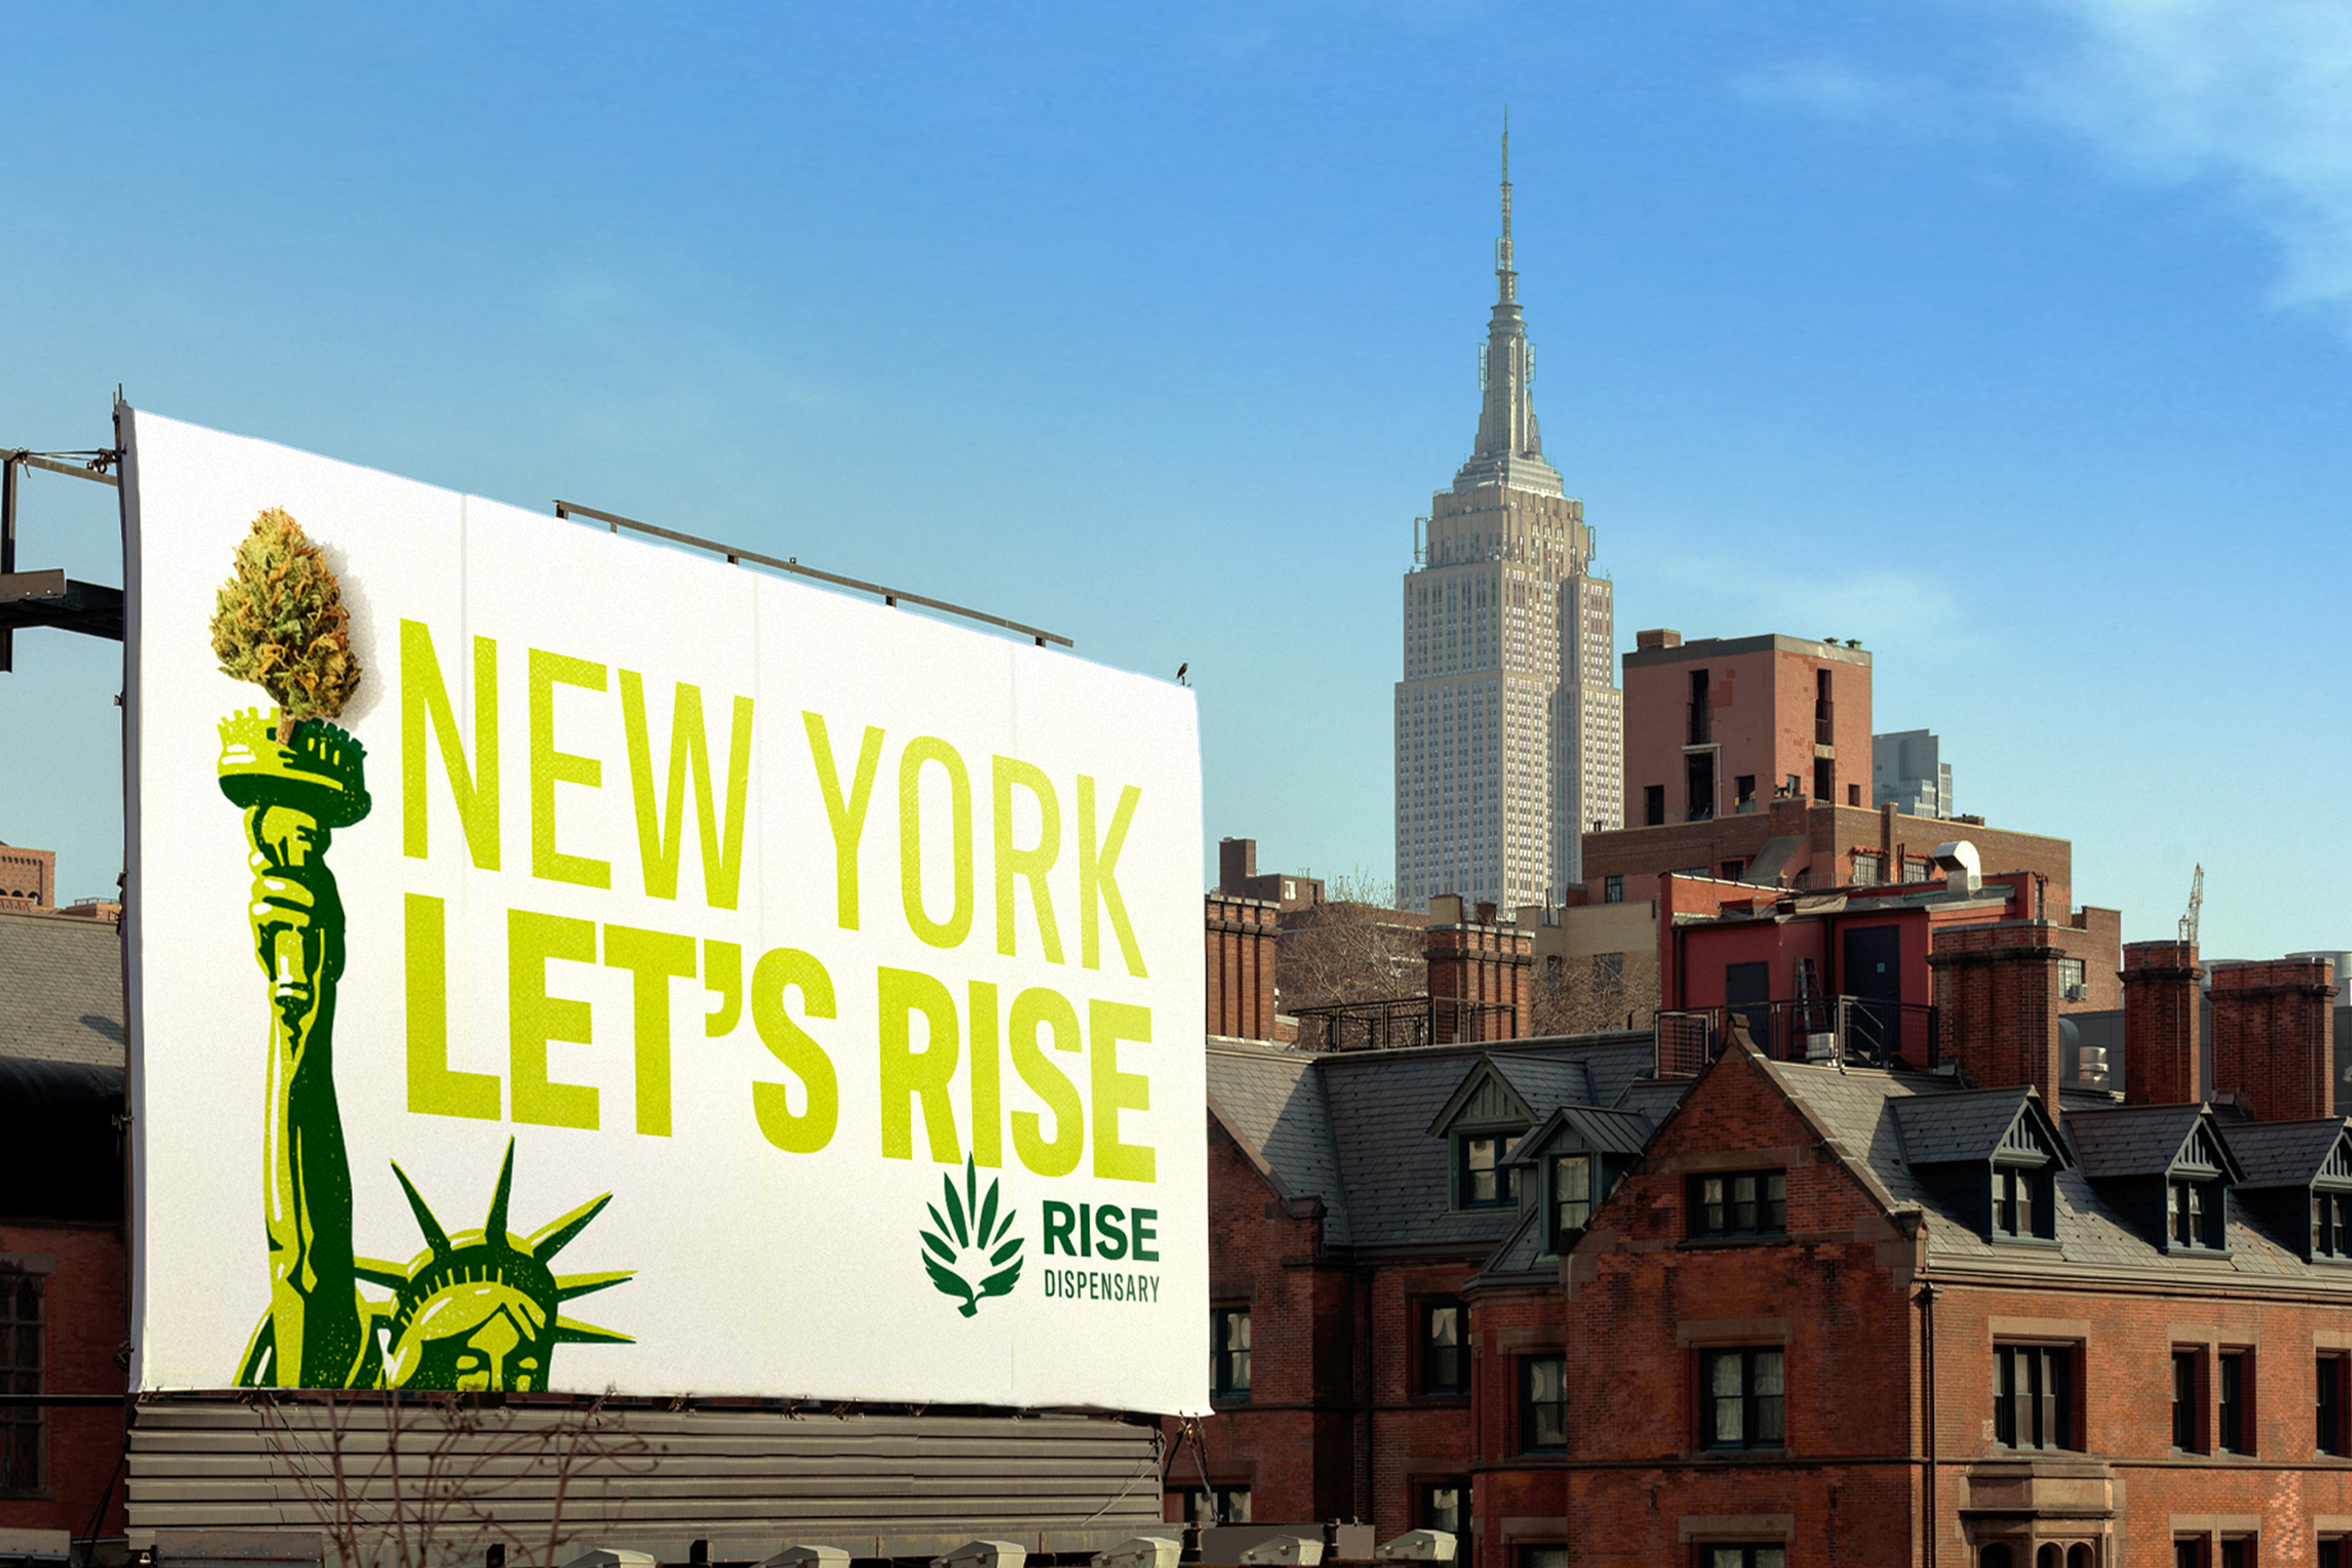 RISE branded advertisement on a billboard